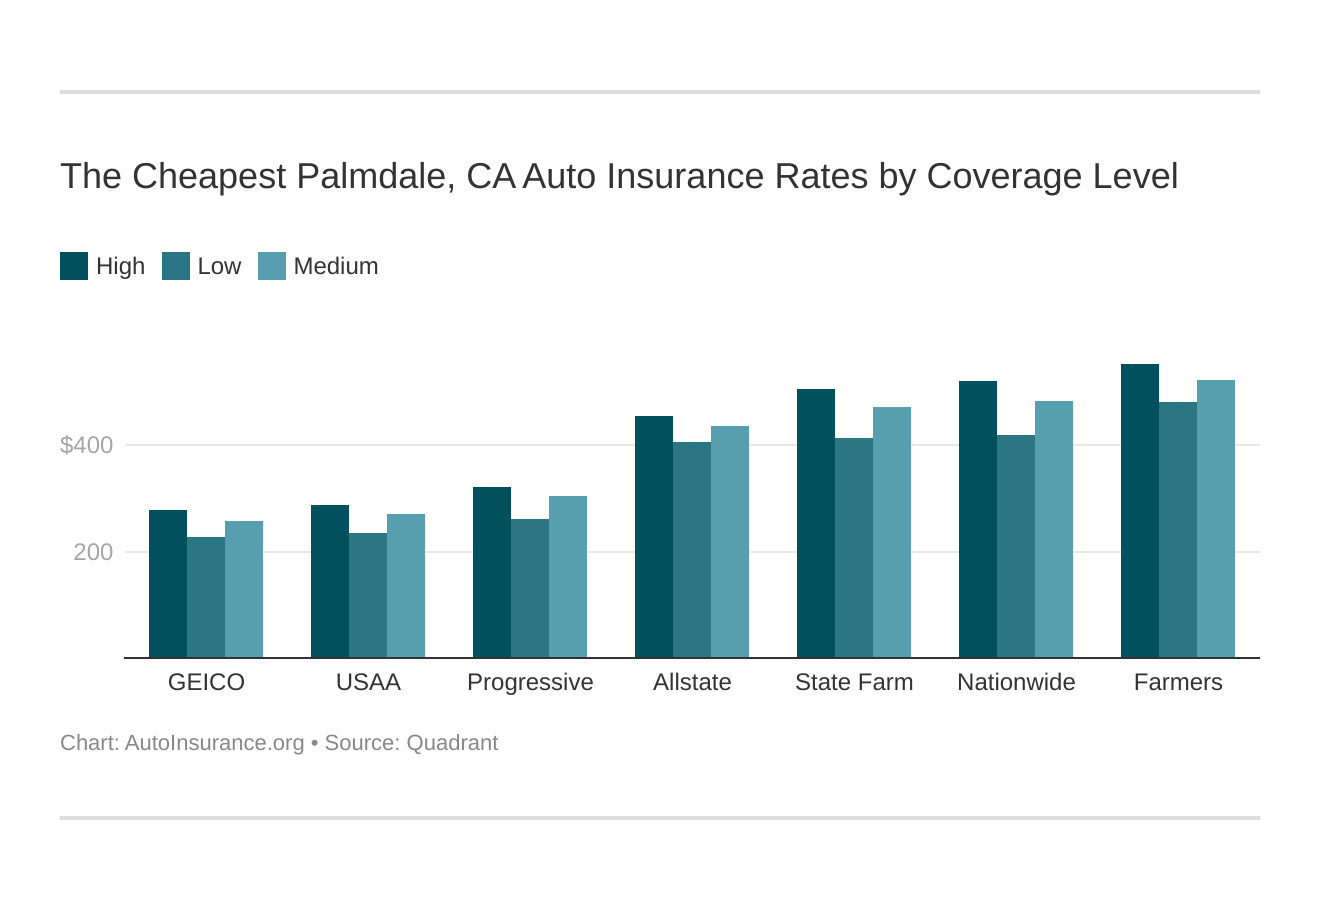 The Cheapest Palmdale, CA Auto Insurance Rates by Coverage Level